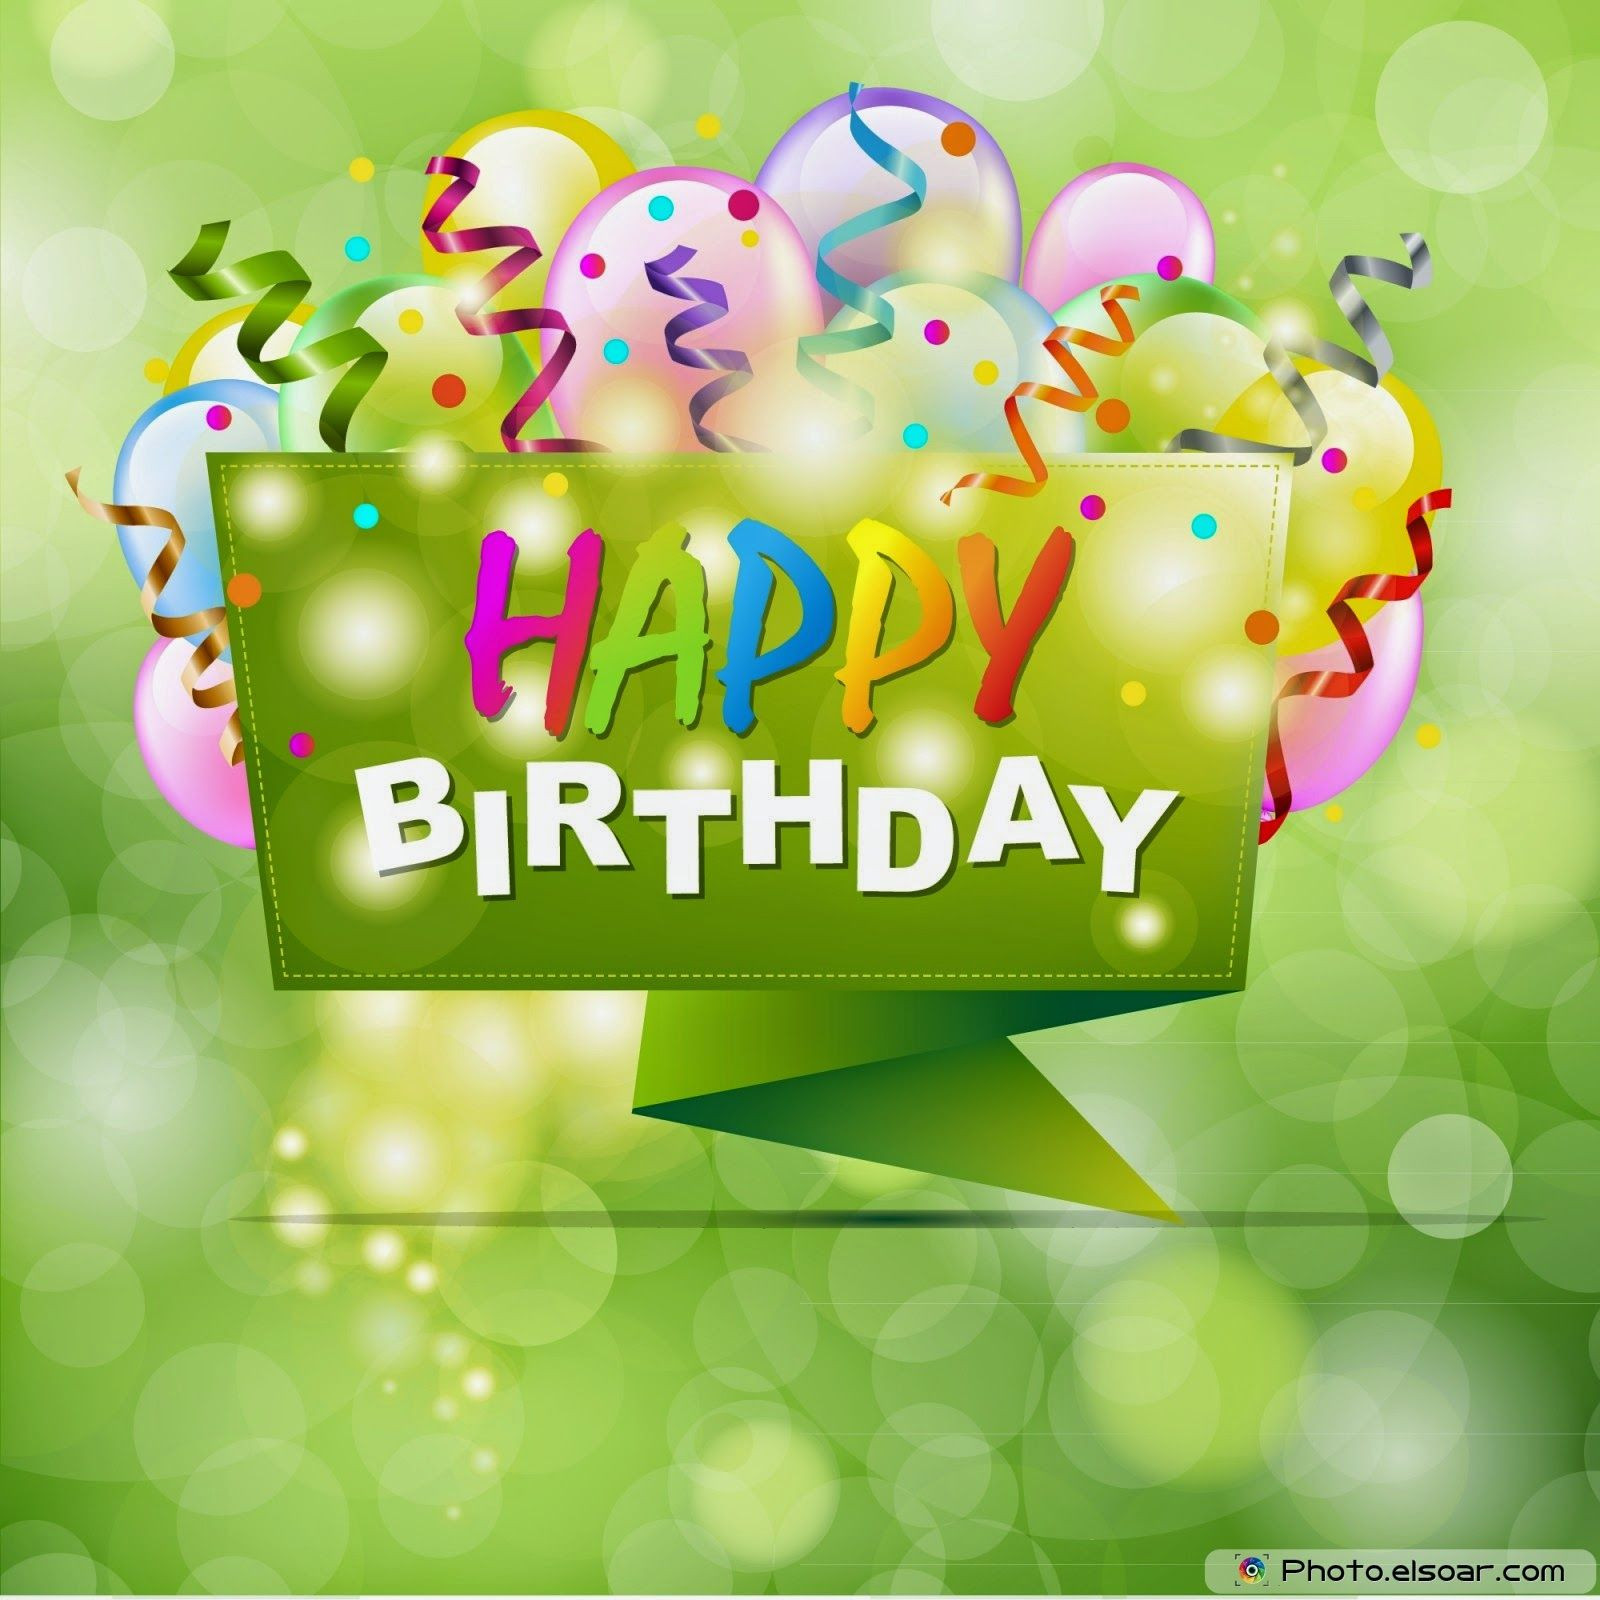 Happy Birthday Wishes Images Free Download
 Happy Birthday Quotes &